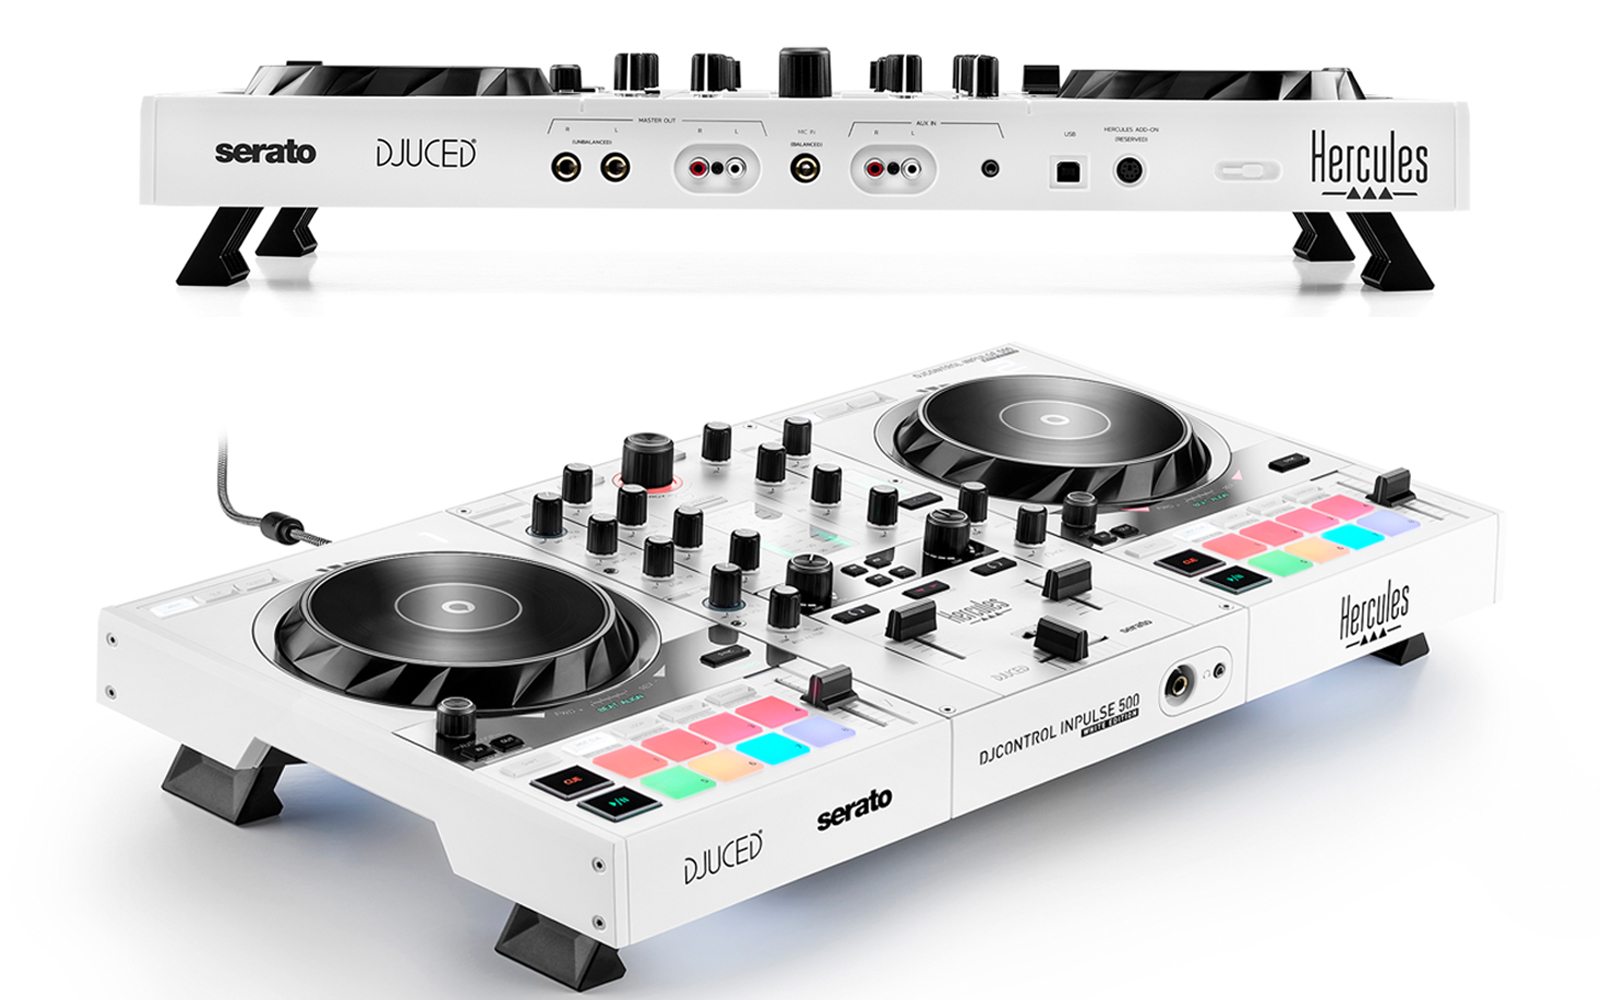 Getting Started With The Hercules DJ Control Inpulse 500 - We Are